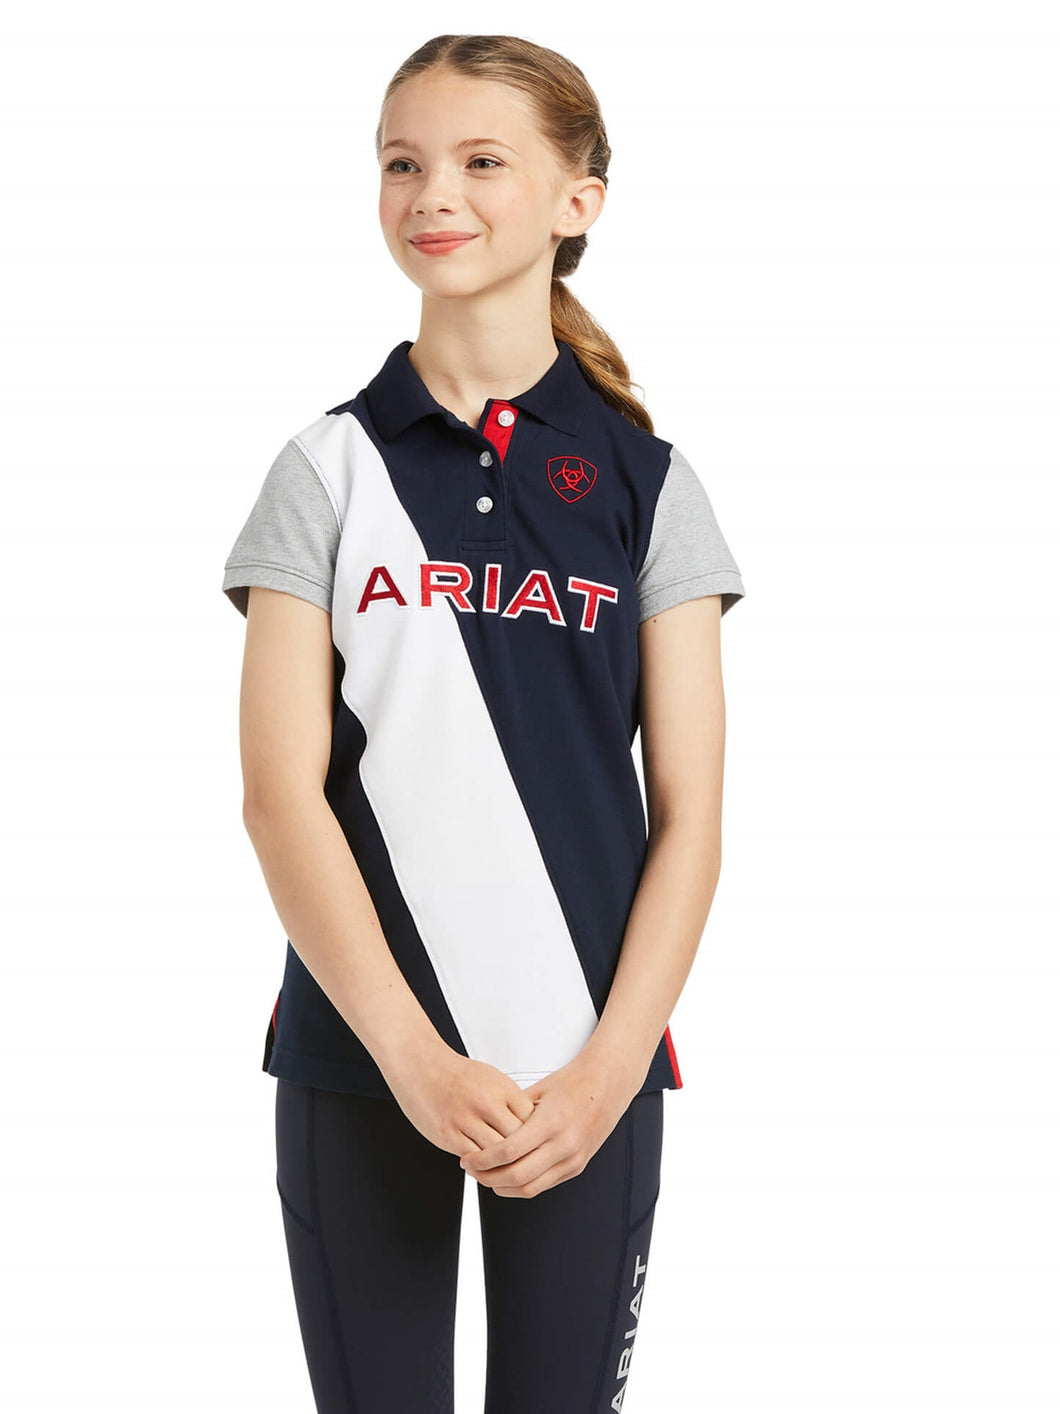 40% OFF - ARIAT Kids Taryn Button Polo Shirt - Team Navy - Size: SMALL (Age 8)